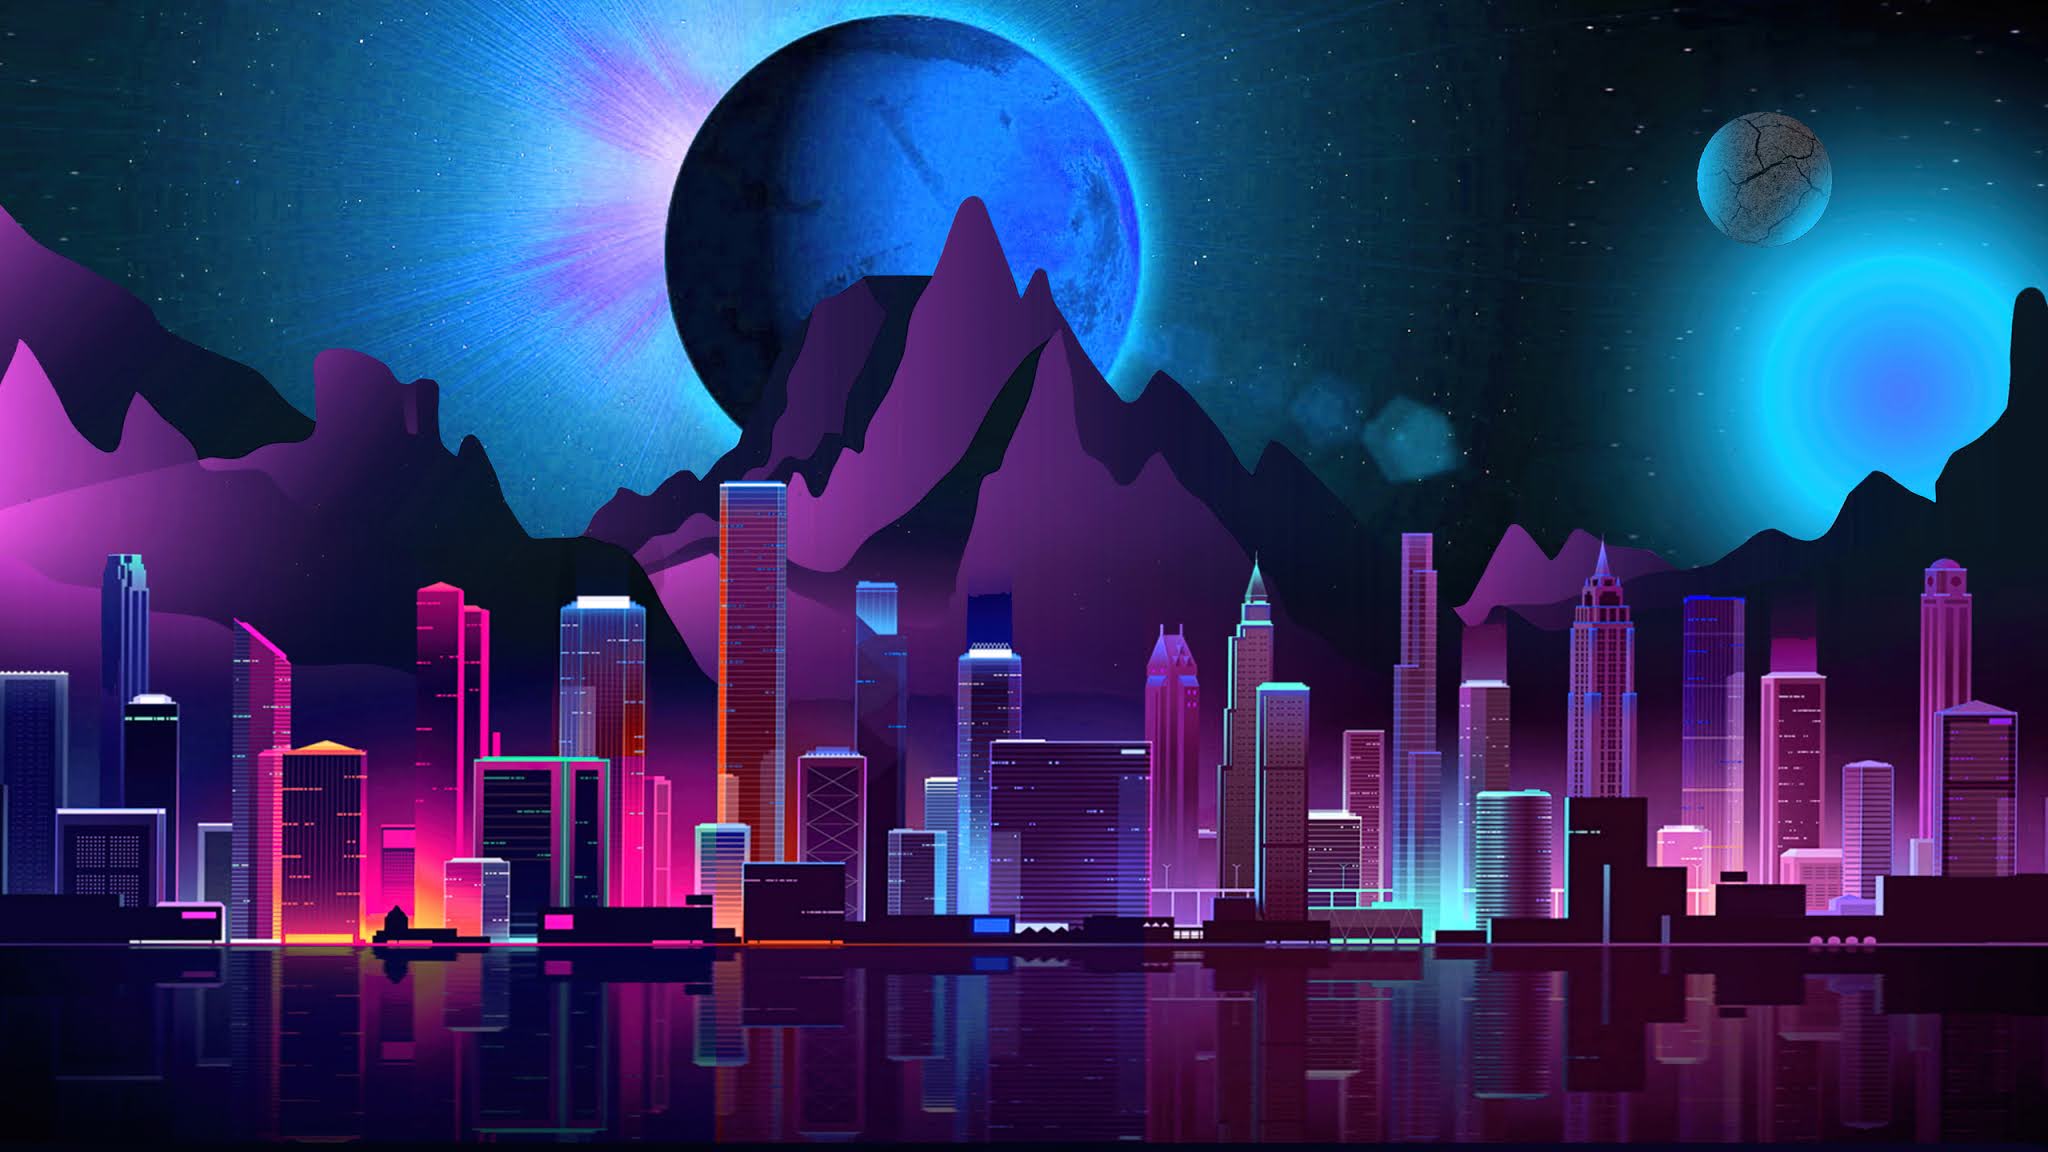 Neon City Futuristic Retro Synthwave Wallpaper - Free Wallpapers for ...